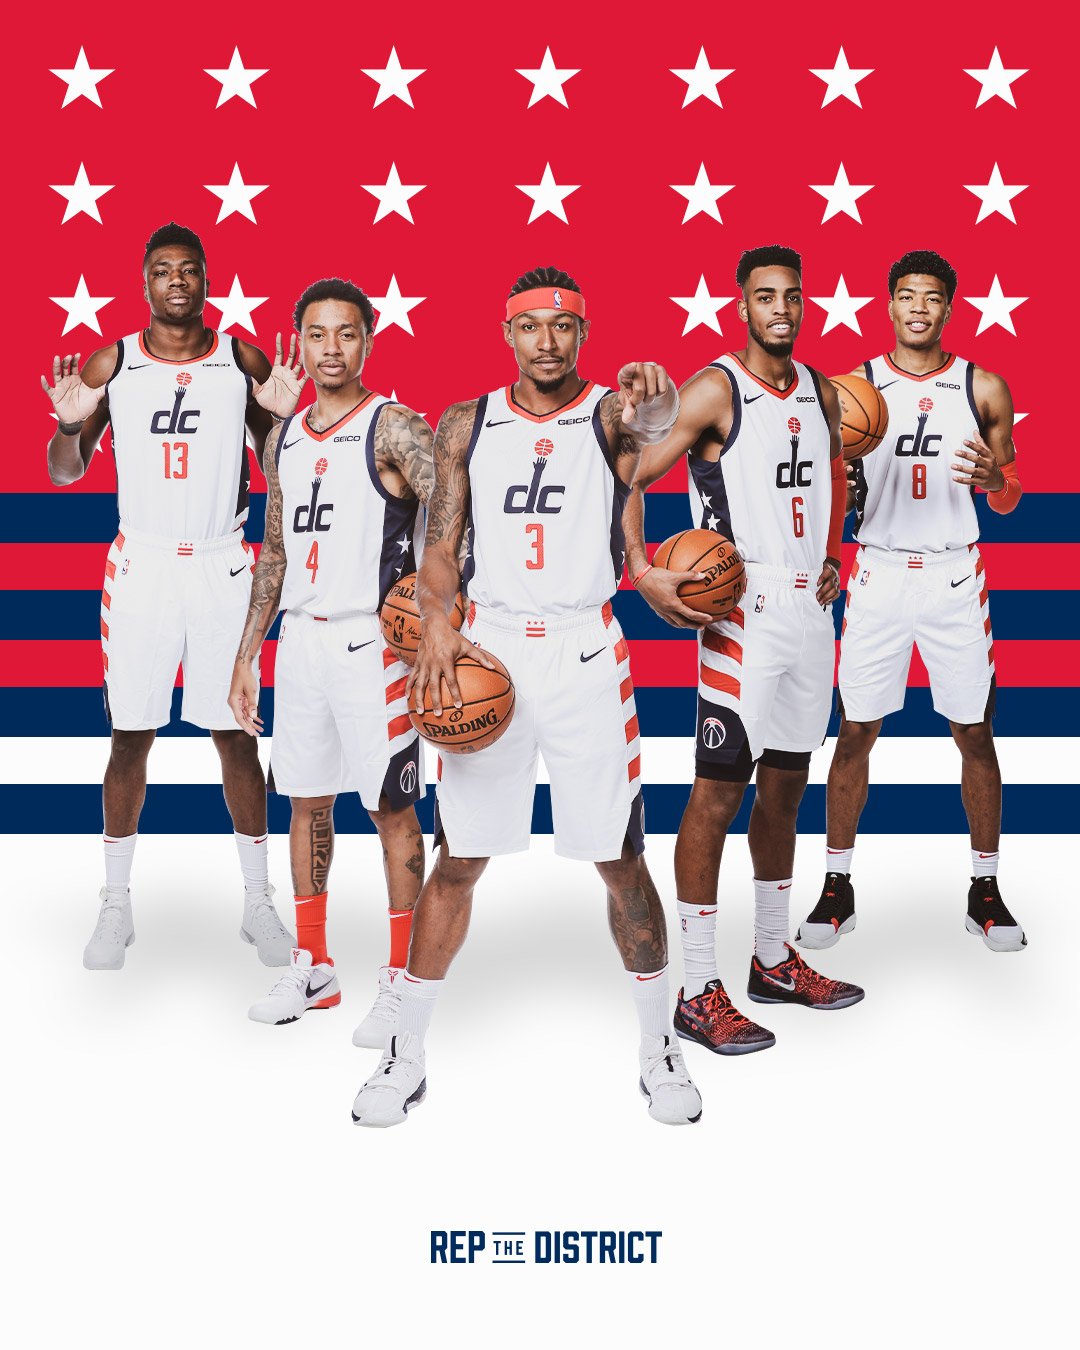 The Washington Wizards are bringing back the stars and stripes